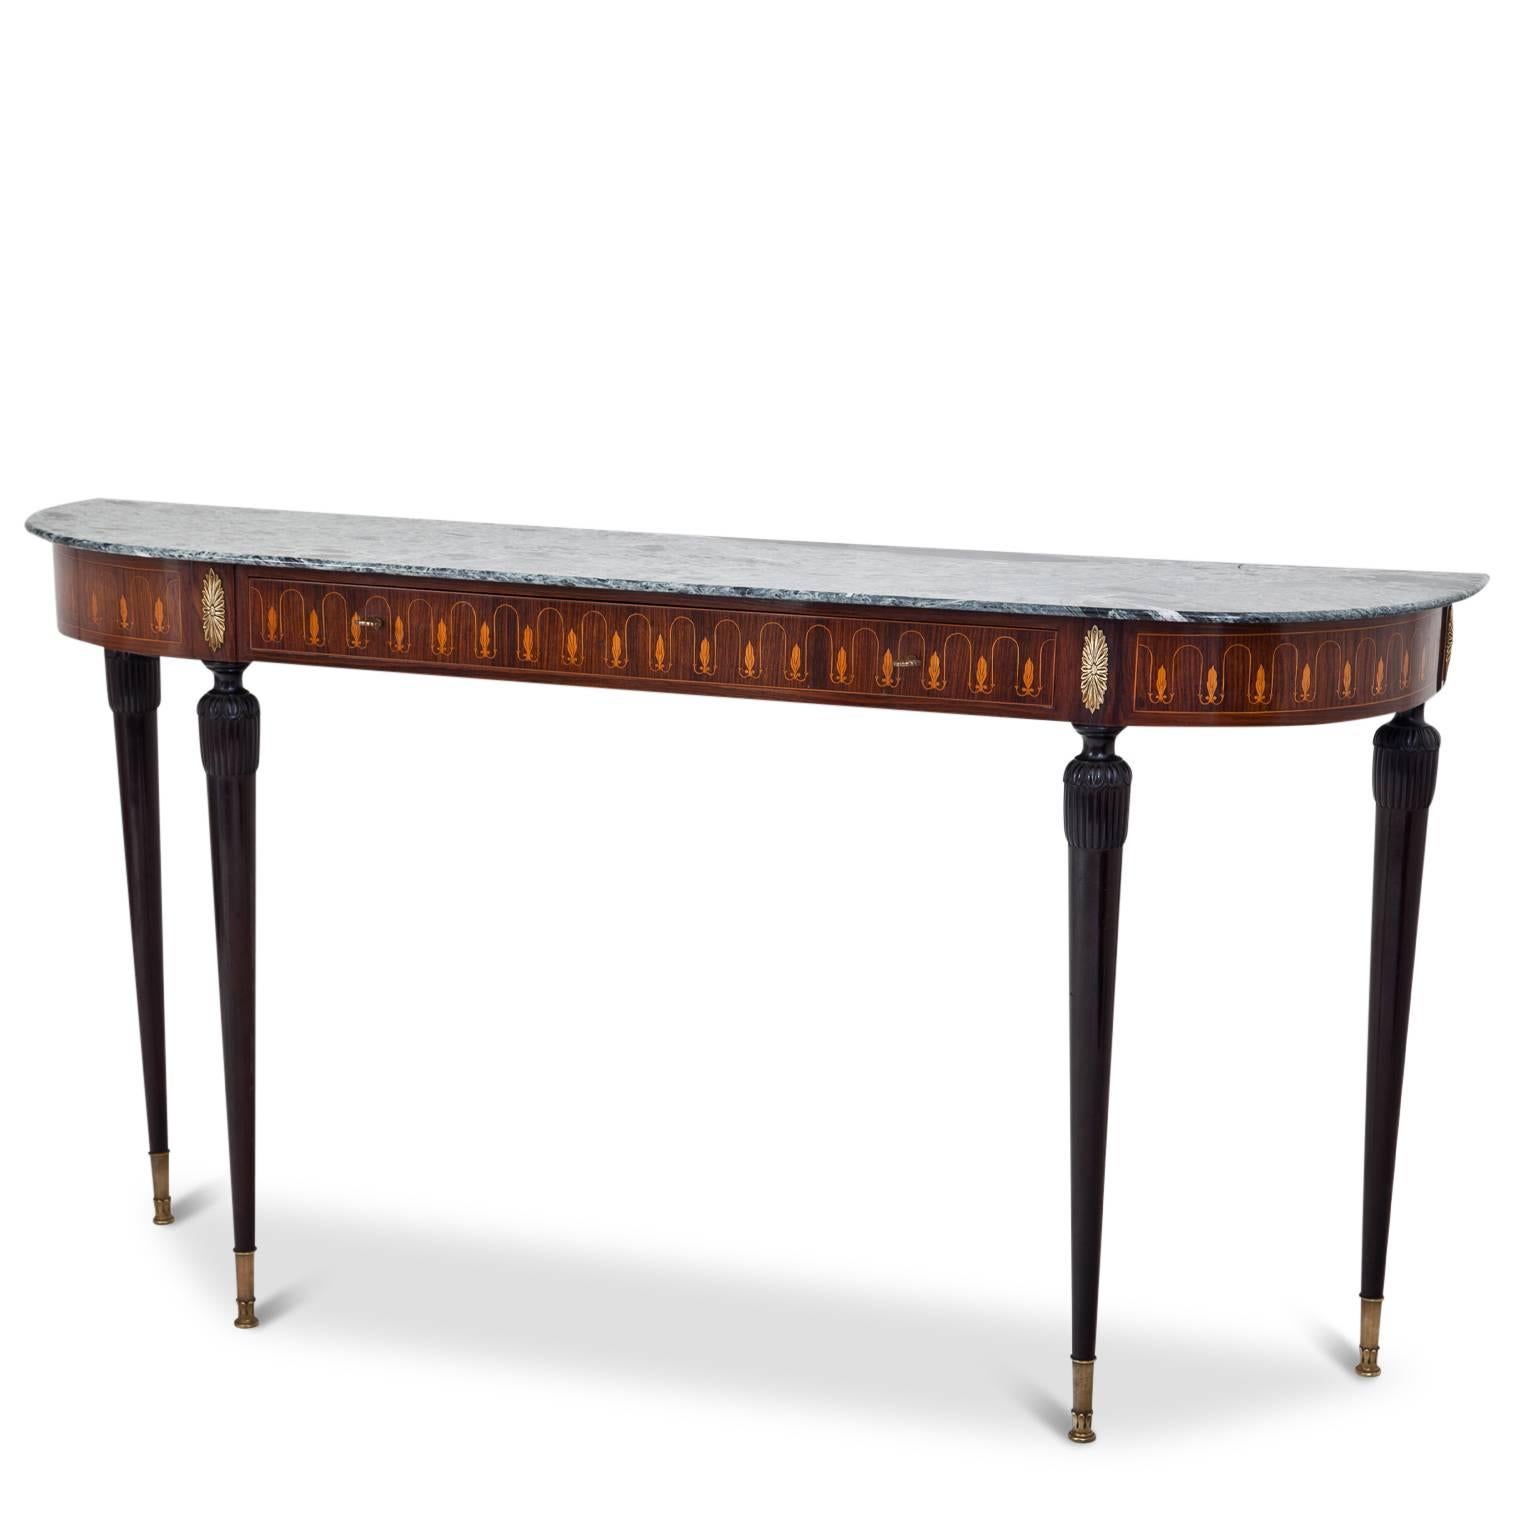 Console table in the style of Paolo Buffa, manufactured by Palazzi dell'Arte Cantù. The console table stands on long tapered legs with brass sabots. The rim is decorated with ornamental inlays and the console has a very beautiful grey-blue marble